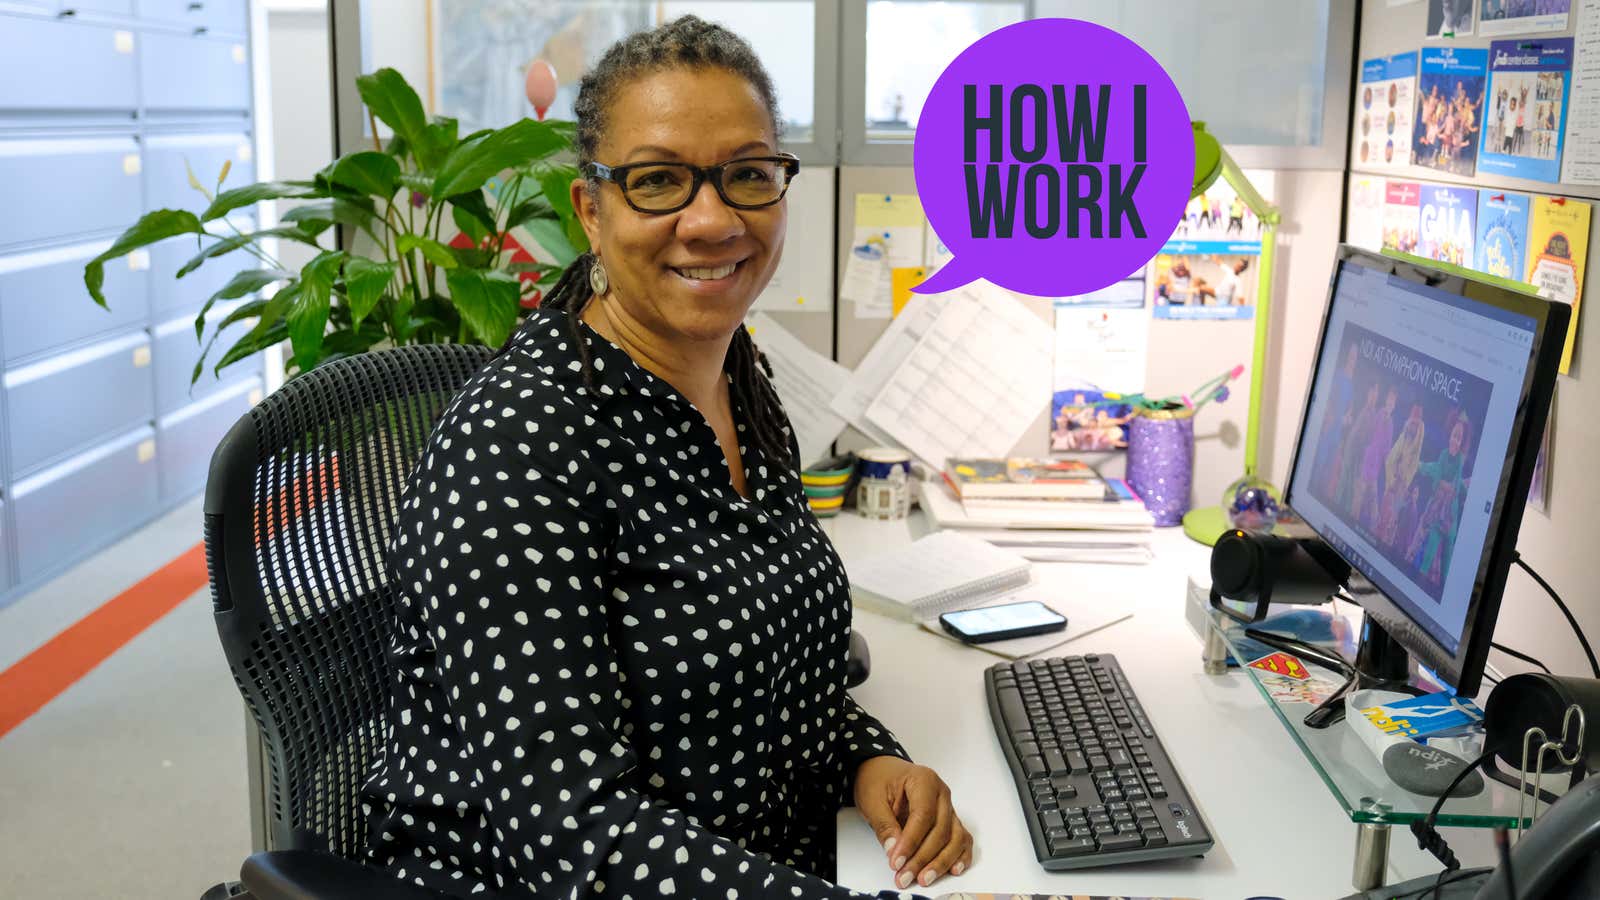 I'm Traci Lester, Executive Director of the National Dance Institute, and This Is How I Work